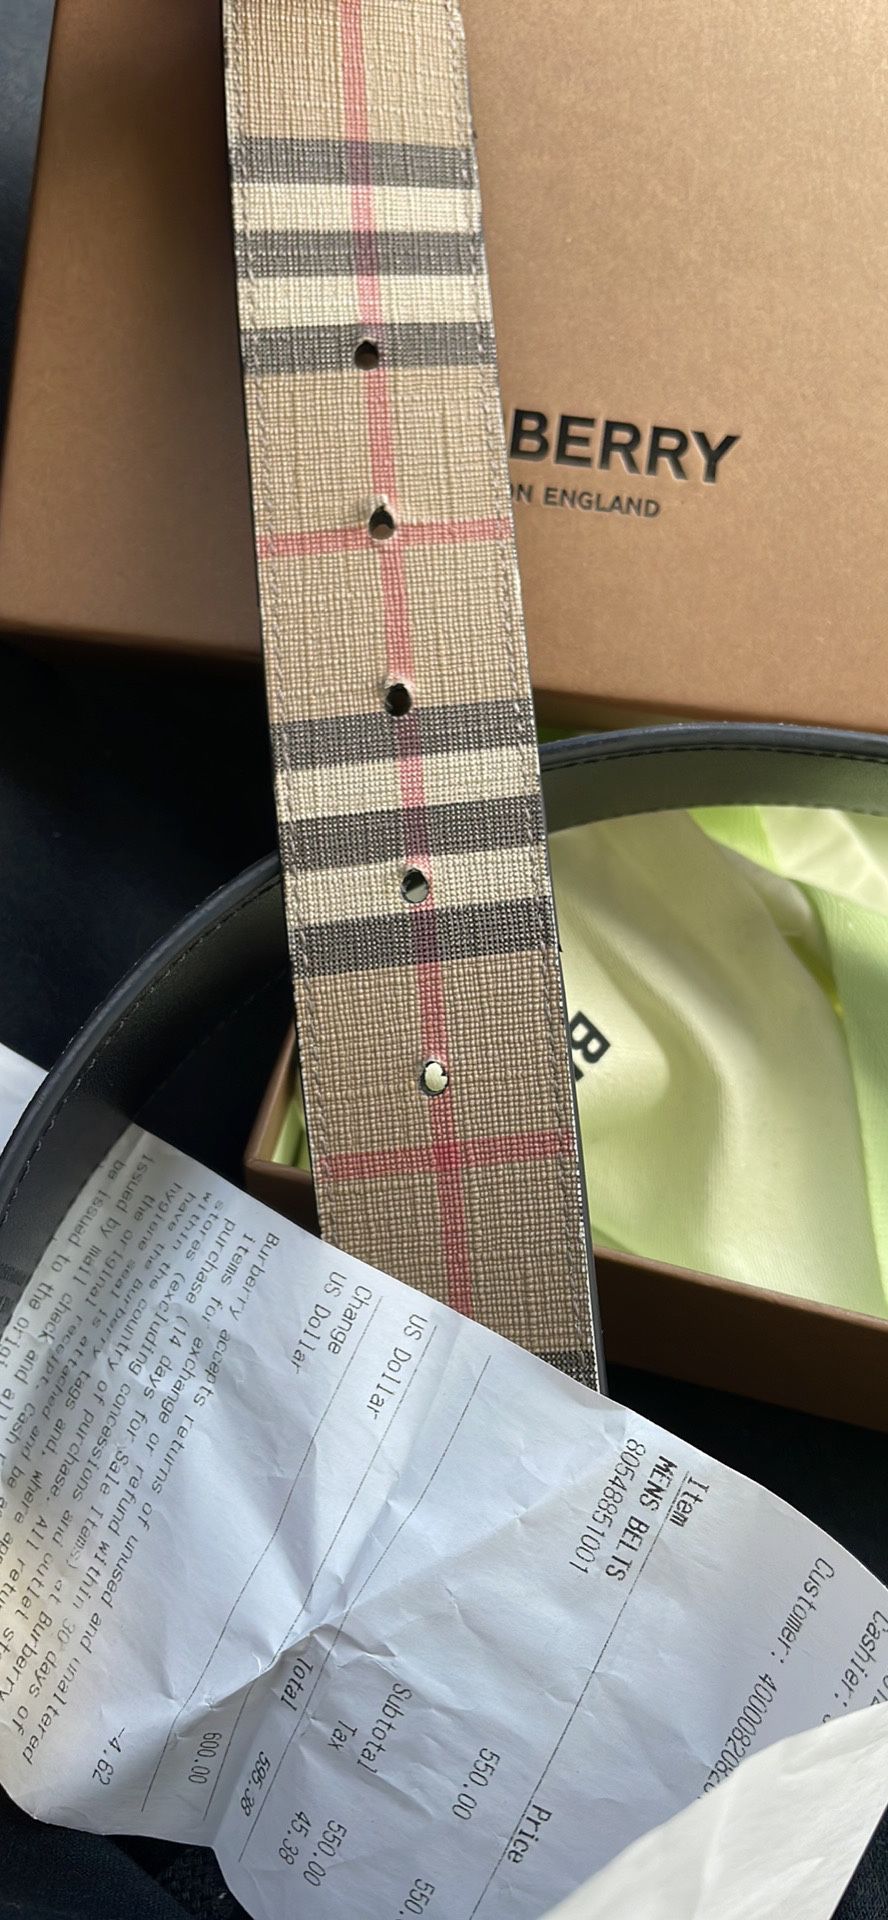 Burberry Belt for Sale in Bloomfield, CT - OfferUp